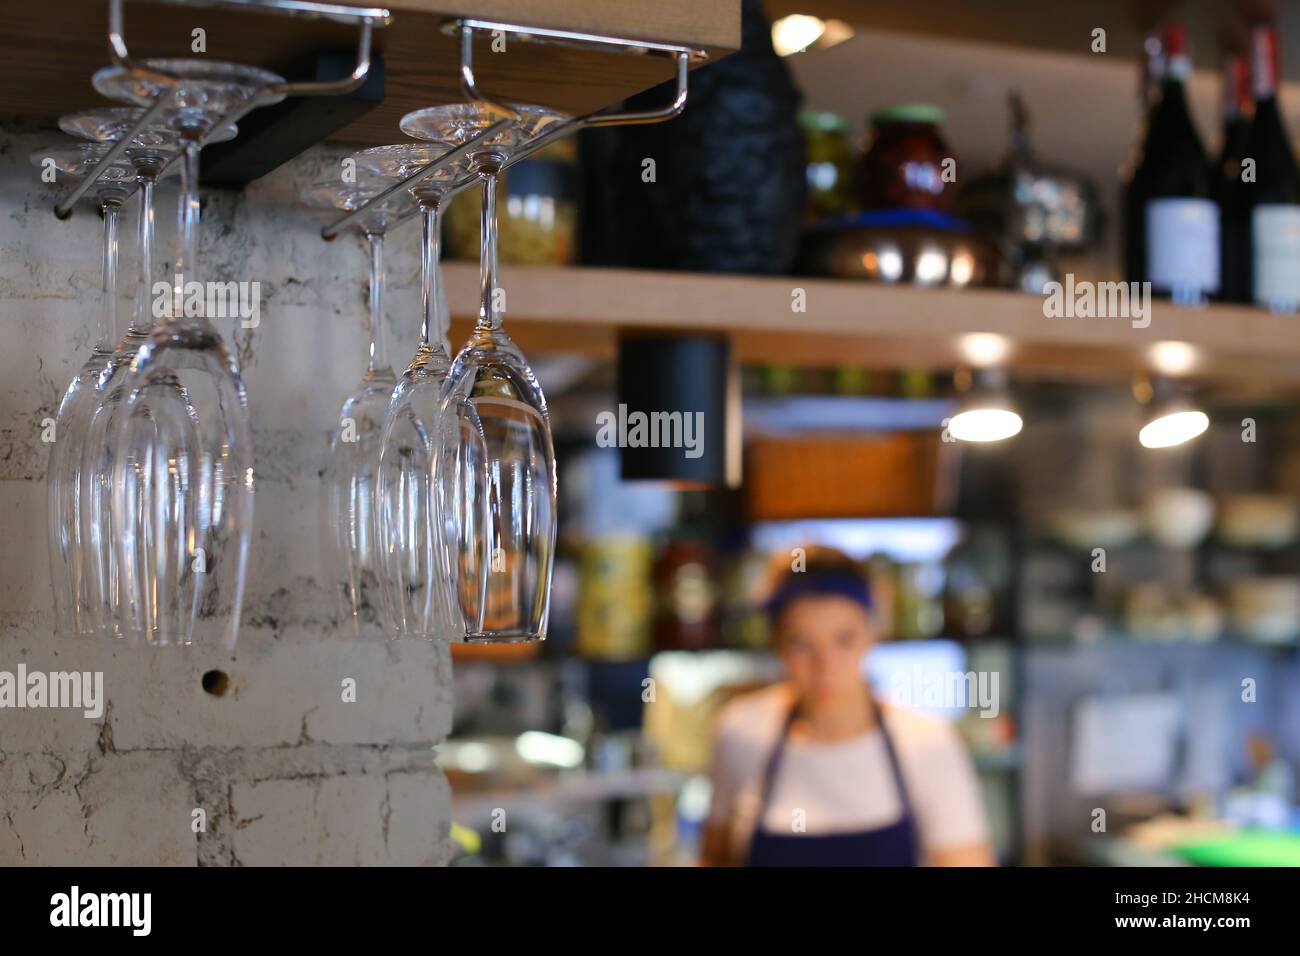 Glasses hanging upside down in cafe restaurant wine Stock Photo